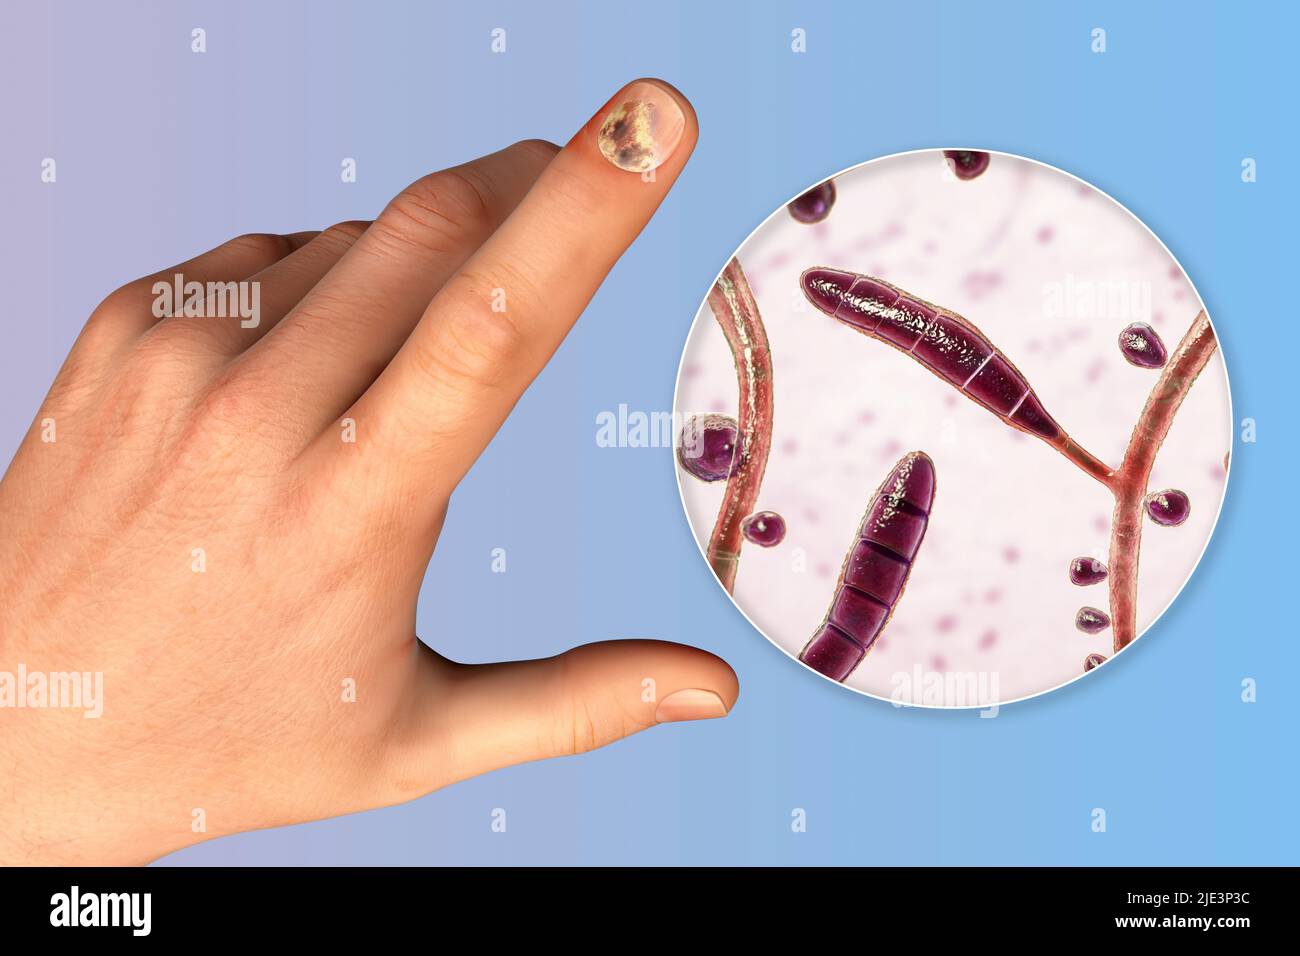 Illustration of a fungal nail infection showing human hand with onychomycosis and close-up view of Trichopyton rubrum fungi, one of the causative agen Stock Photo